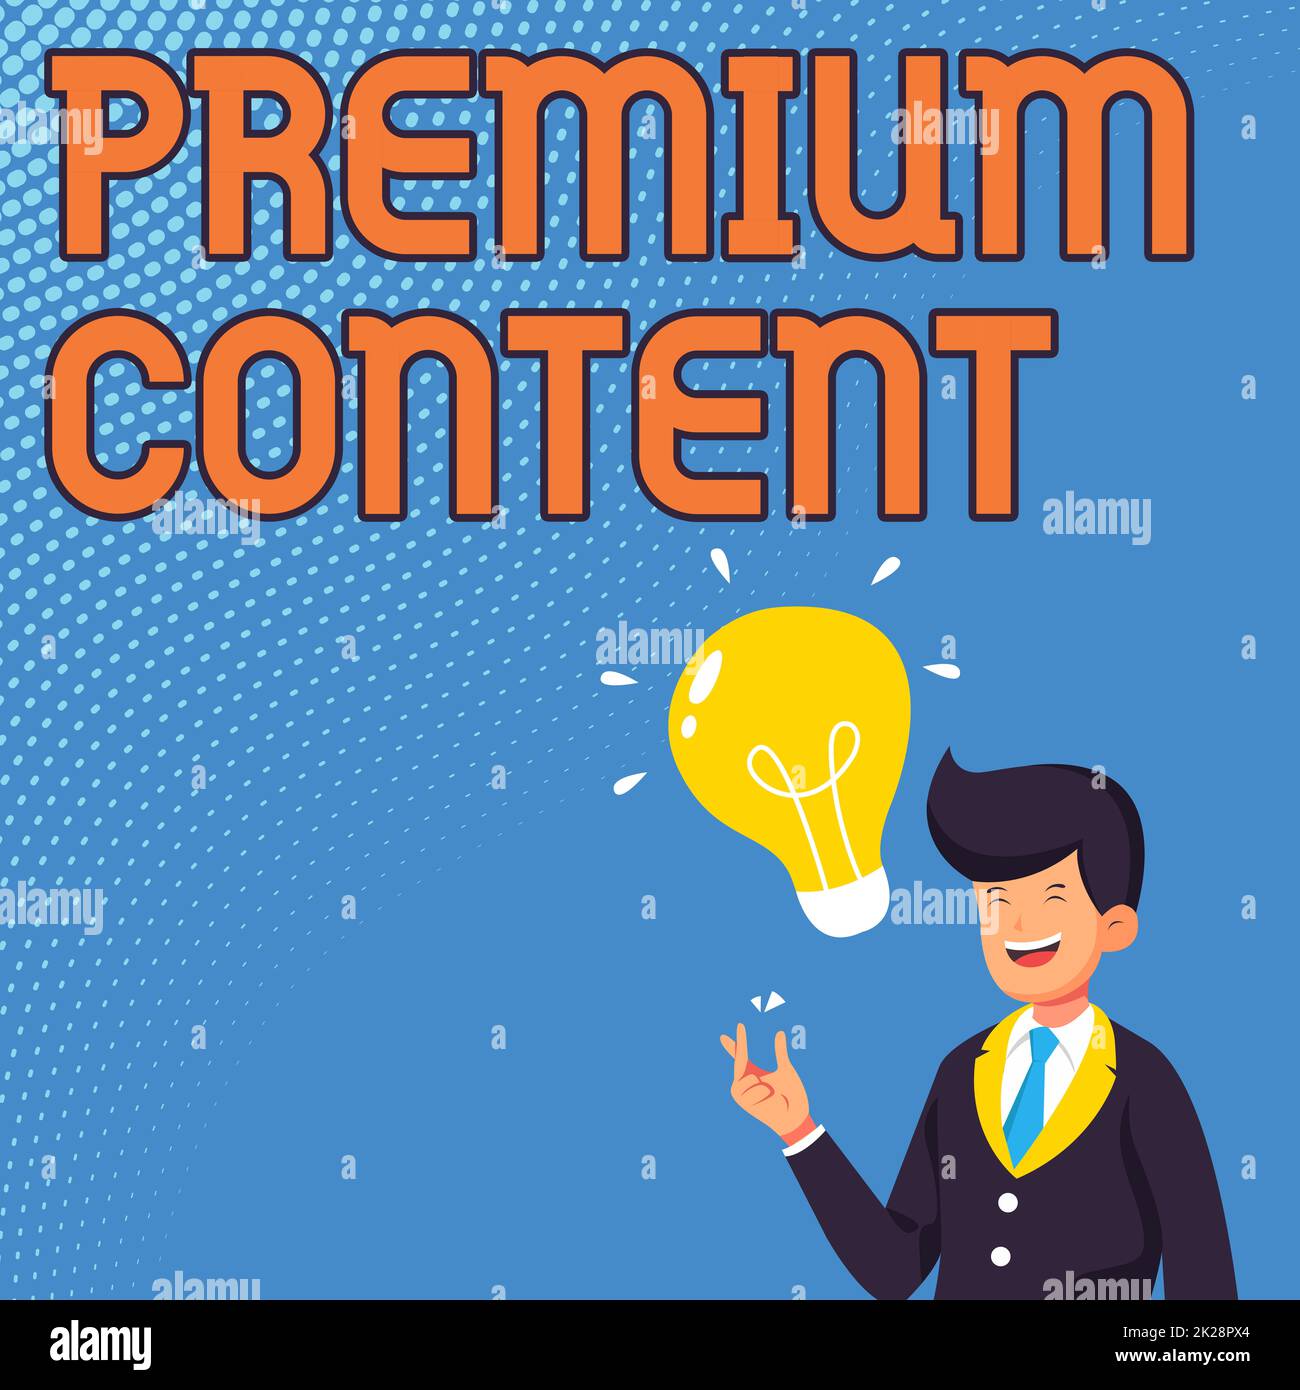 Writing displaying text Premium Content. Word for higher quality or more desirable than free content Gentleman Drawing Standing Having New Idea Presented With Light Bulb. Stock Photo